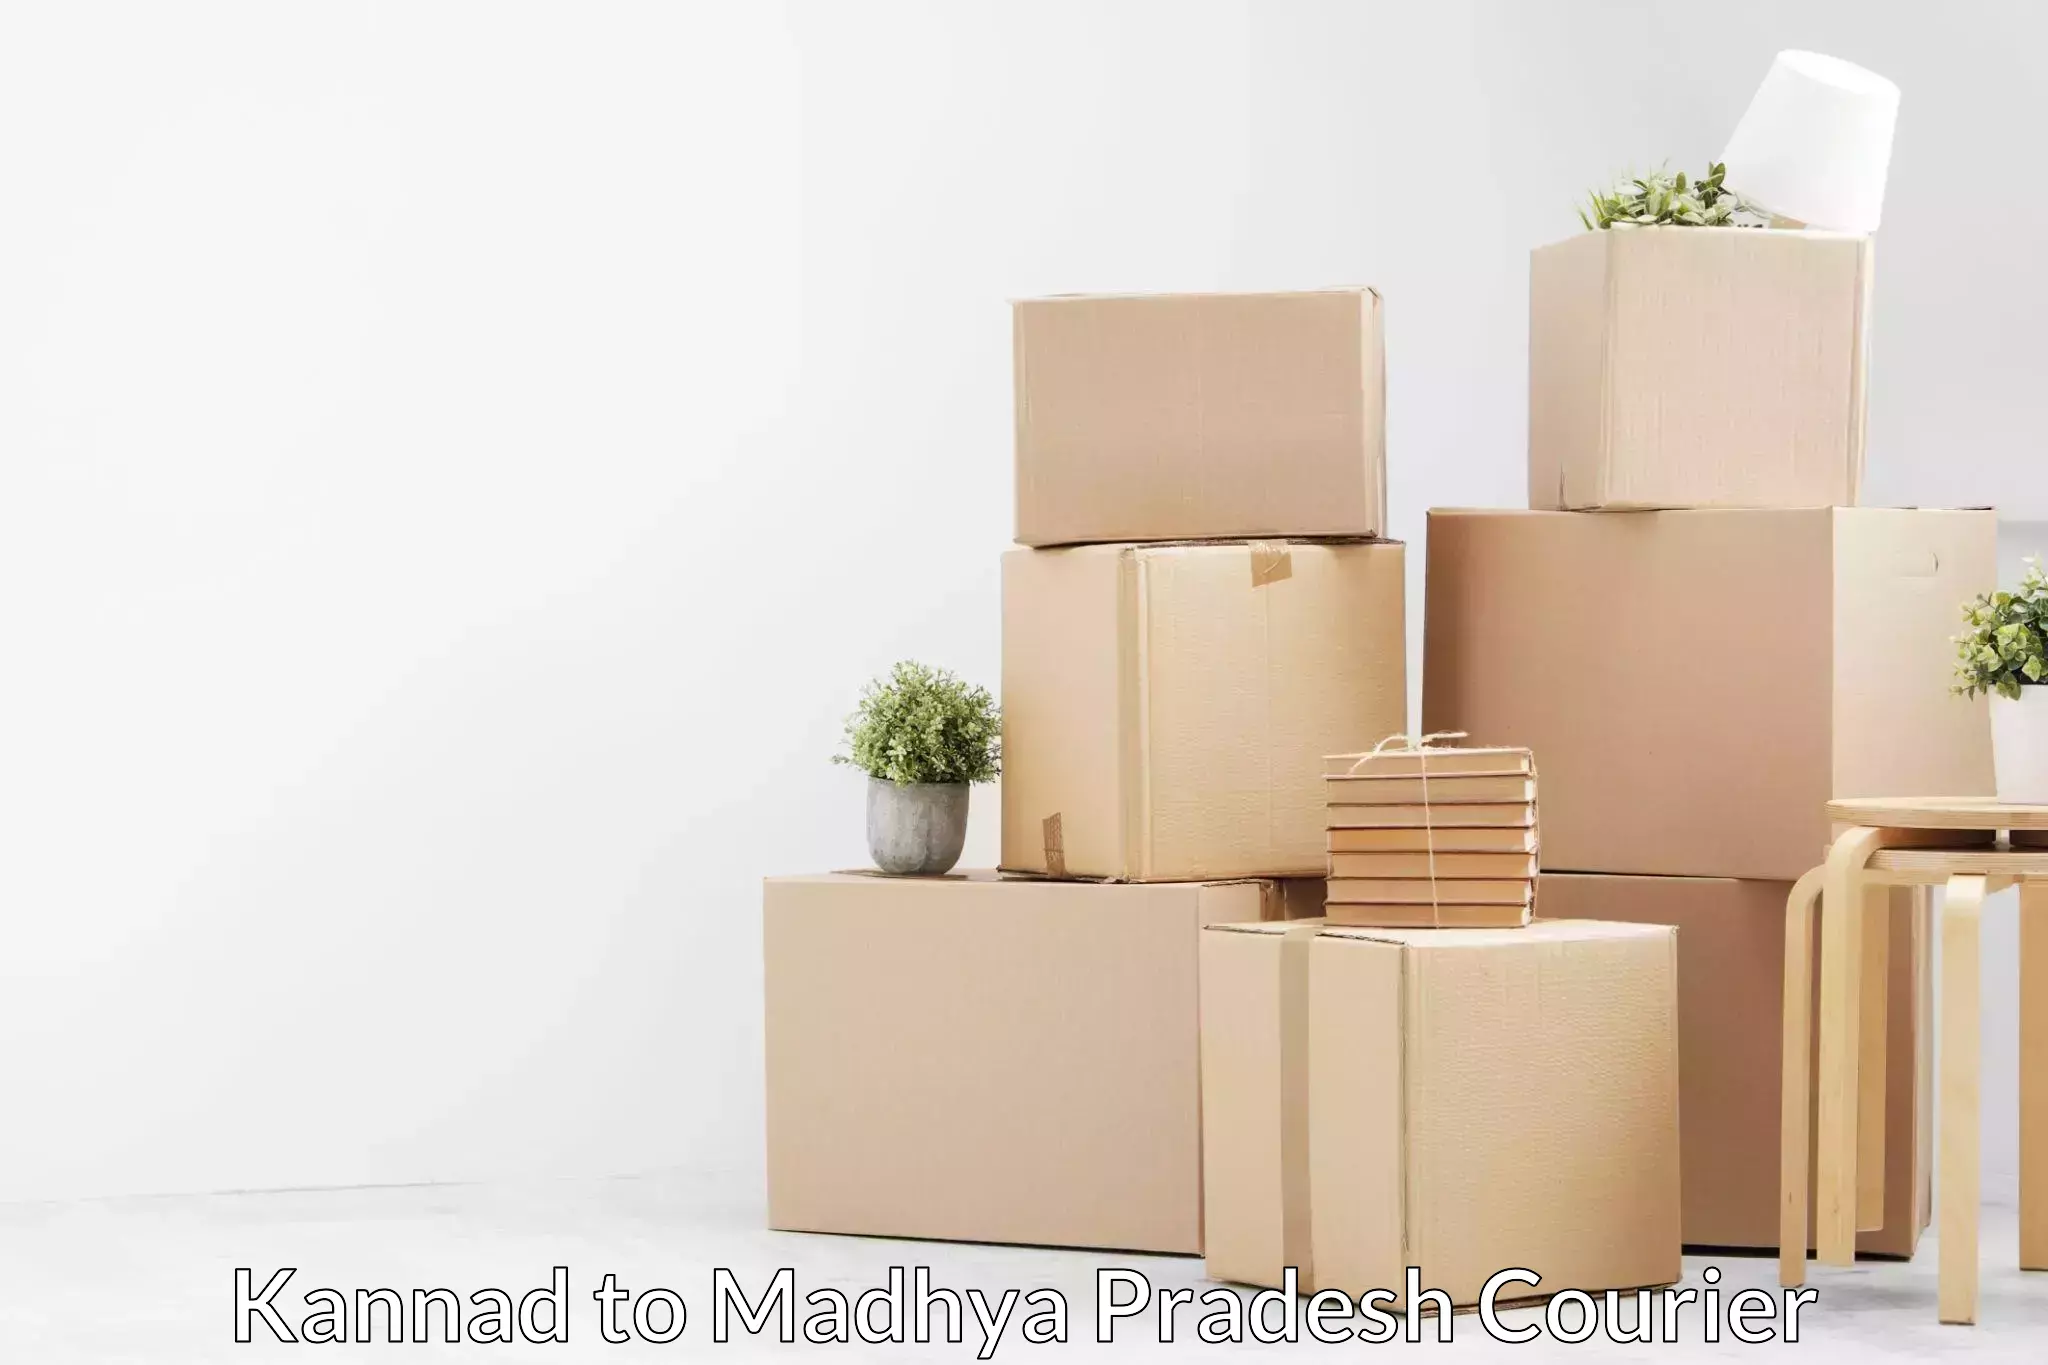 Professional furniture movers in Kannad to IIT Indore